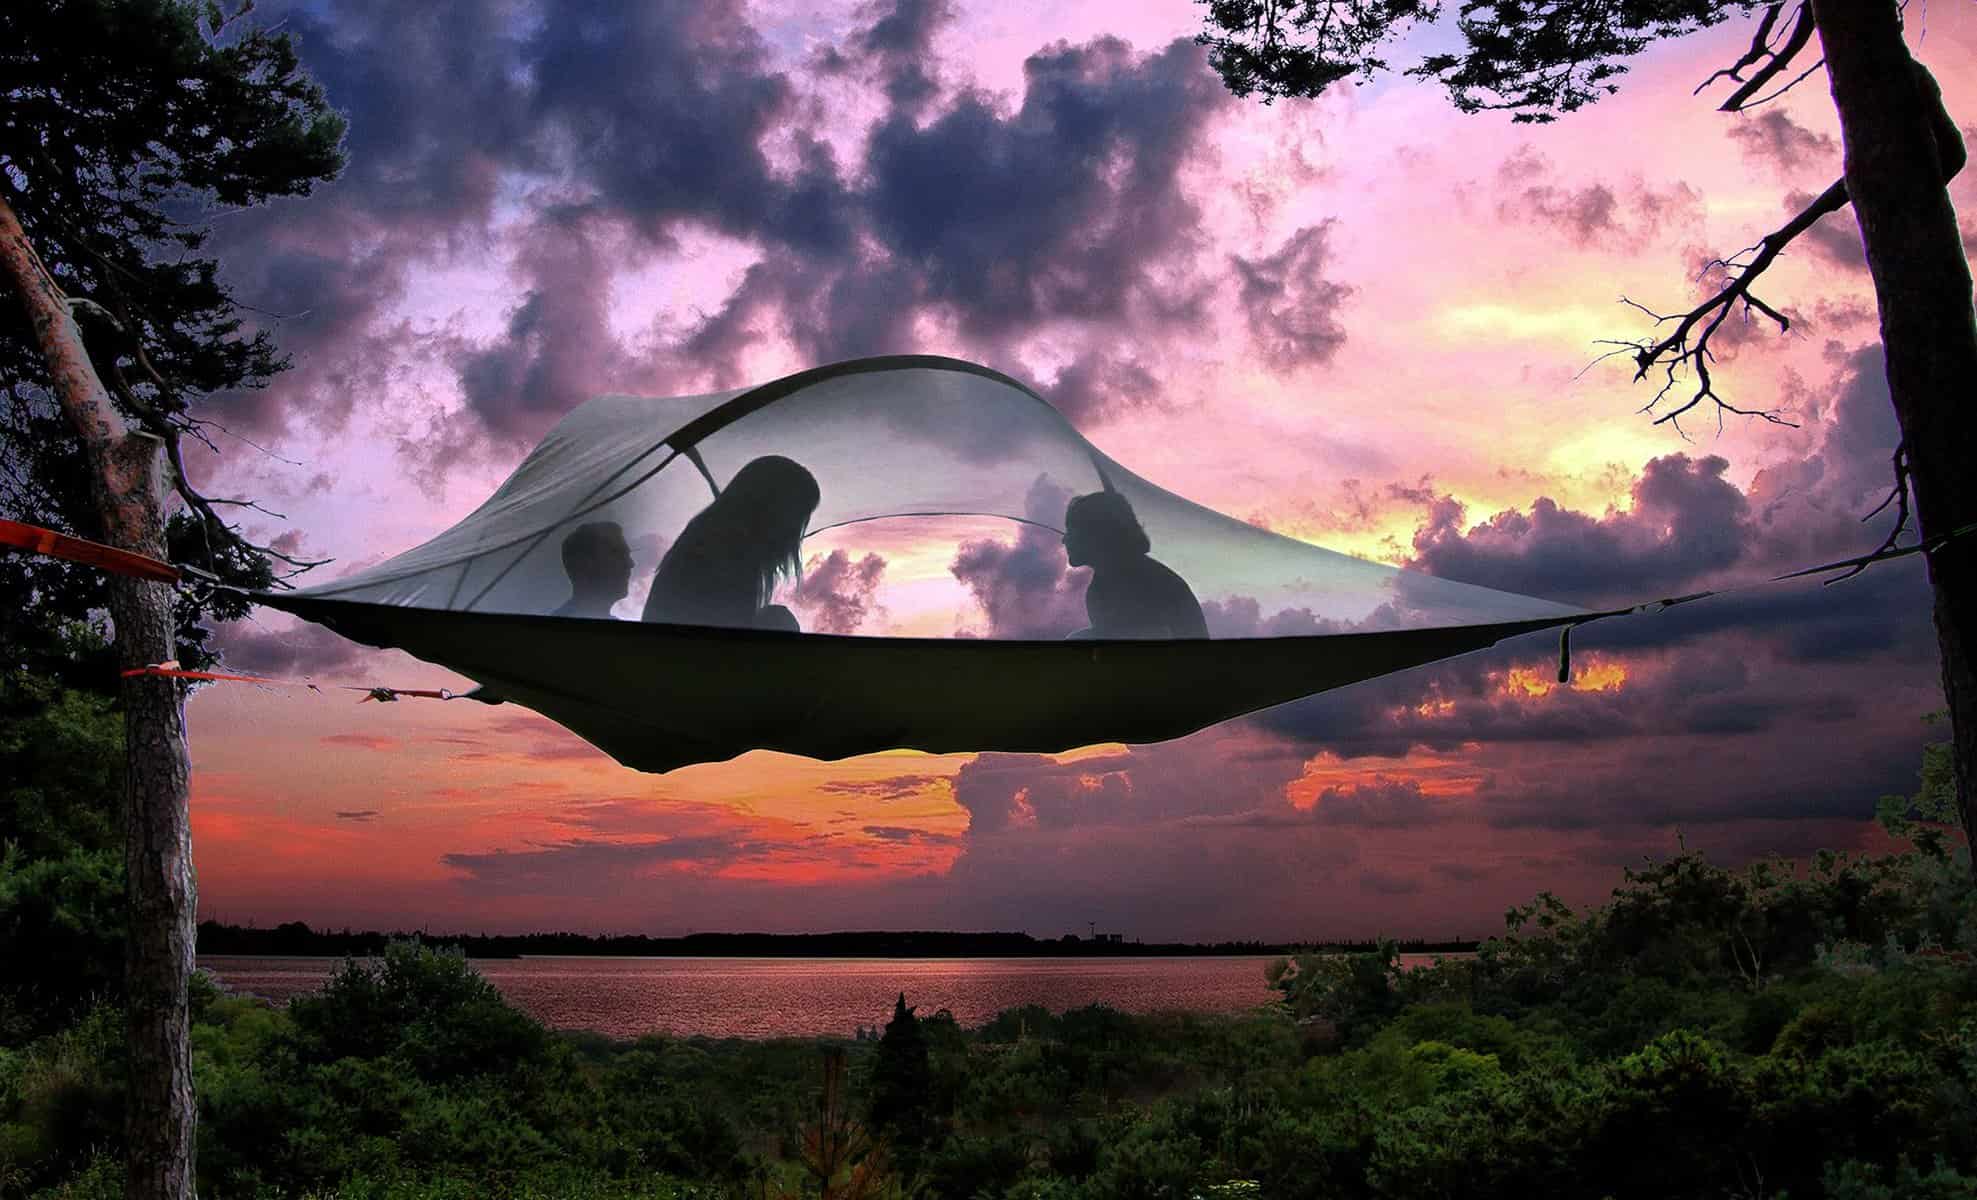 Sky Camping Guide